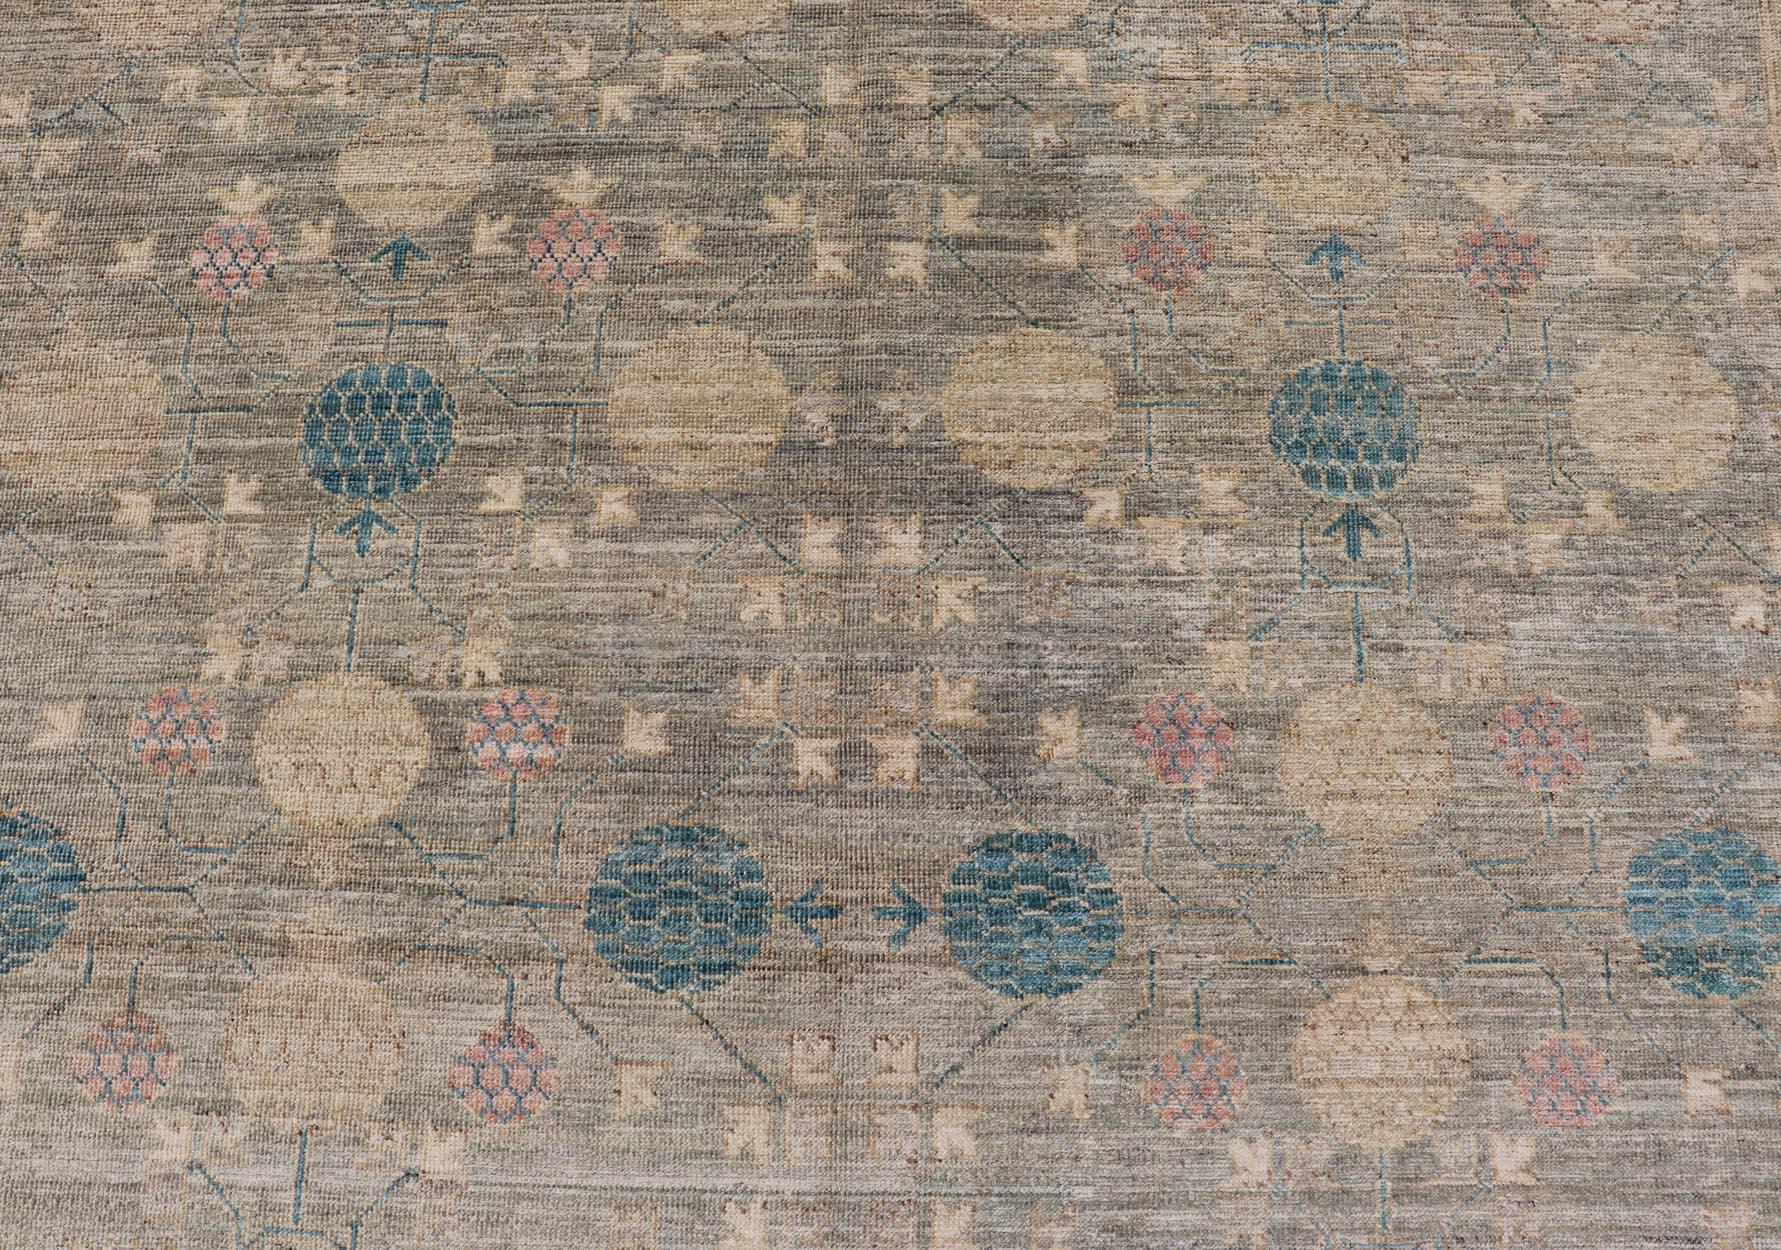 Large Modern Tribal Khotan Rug in Shades of Cream, Green, Blue, and Coral For Sale 2